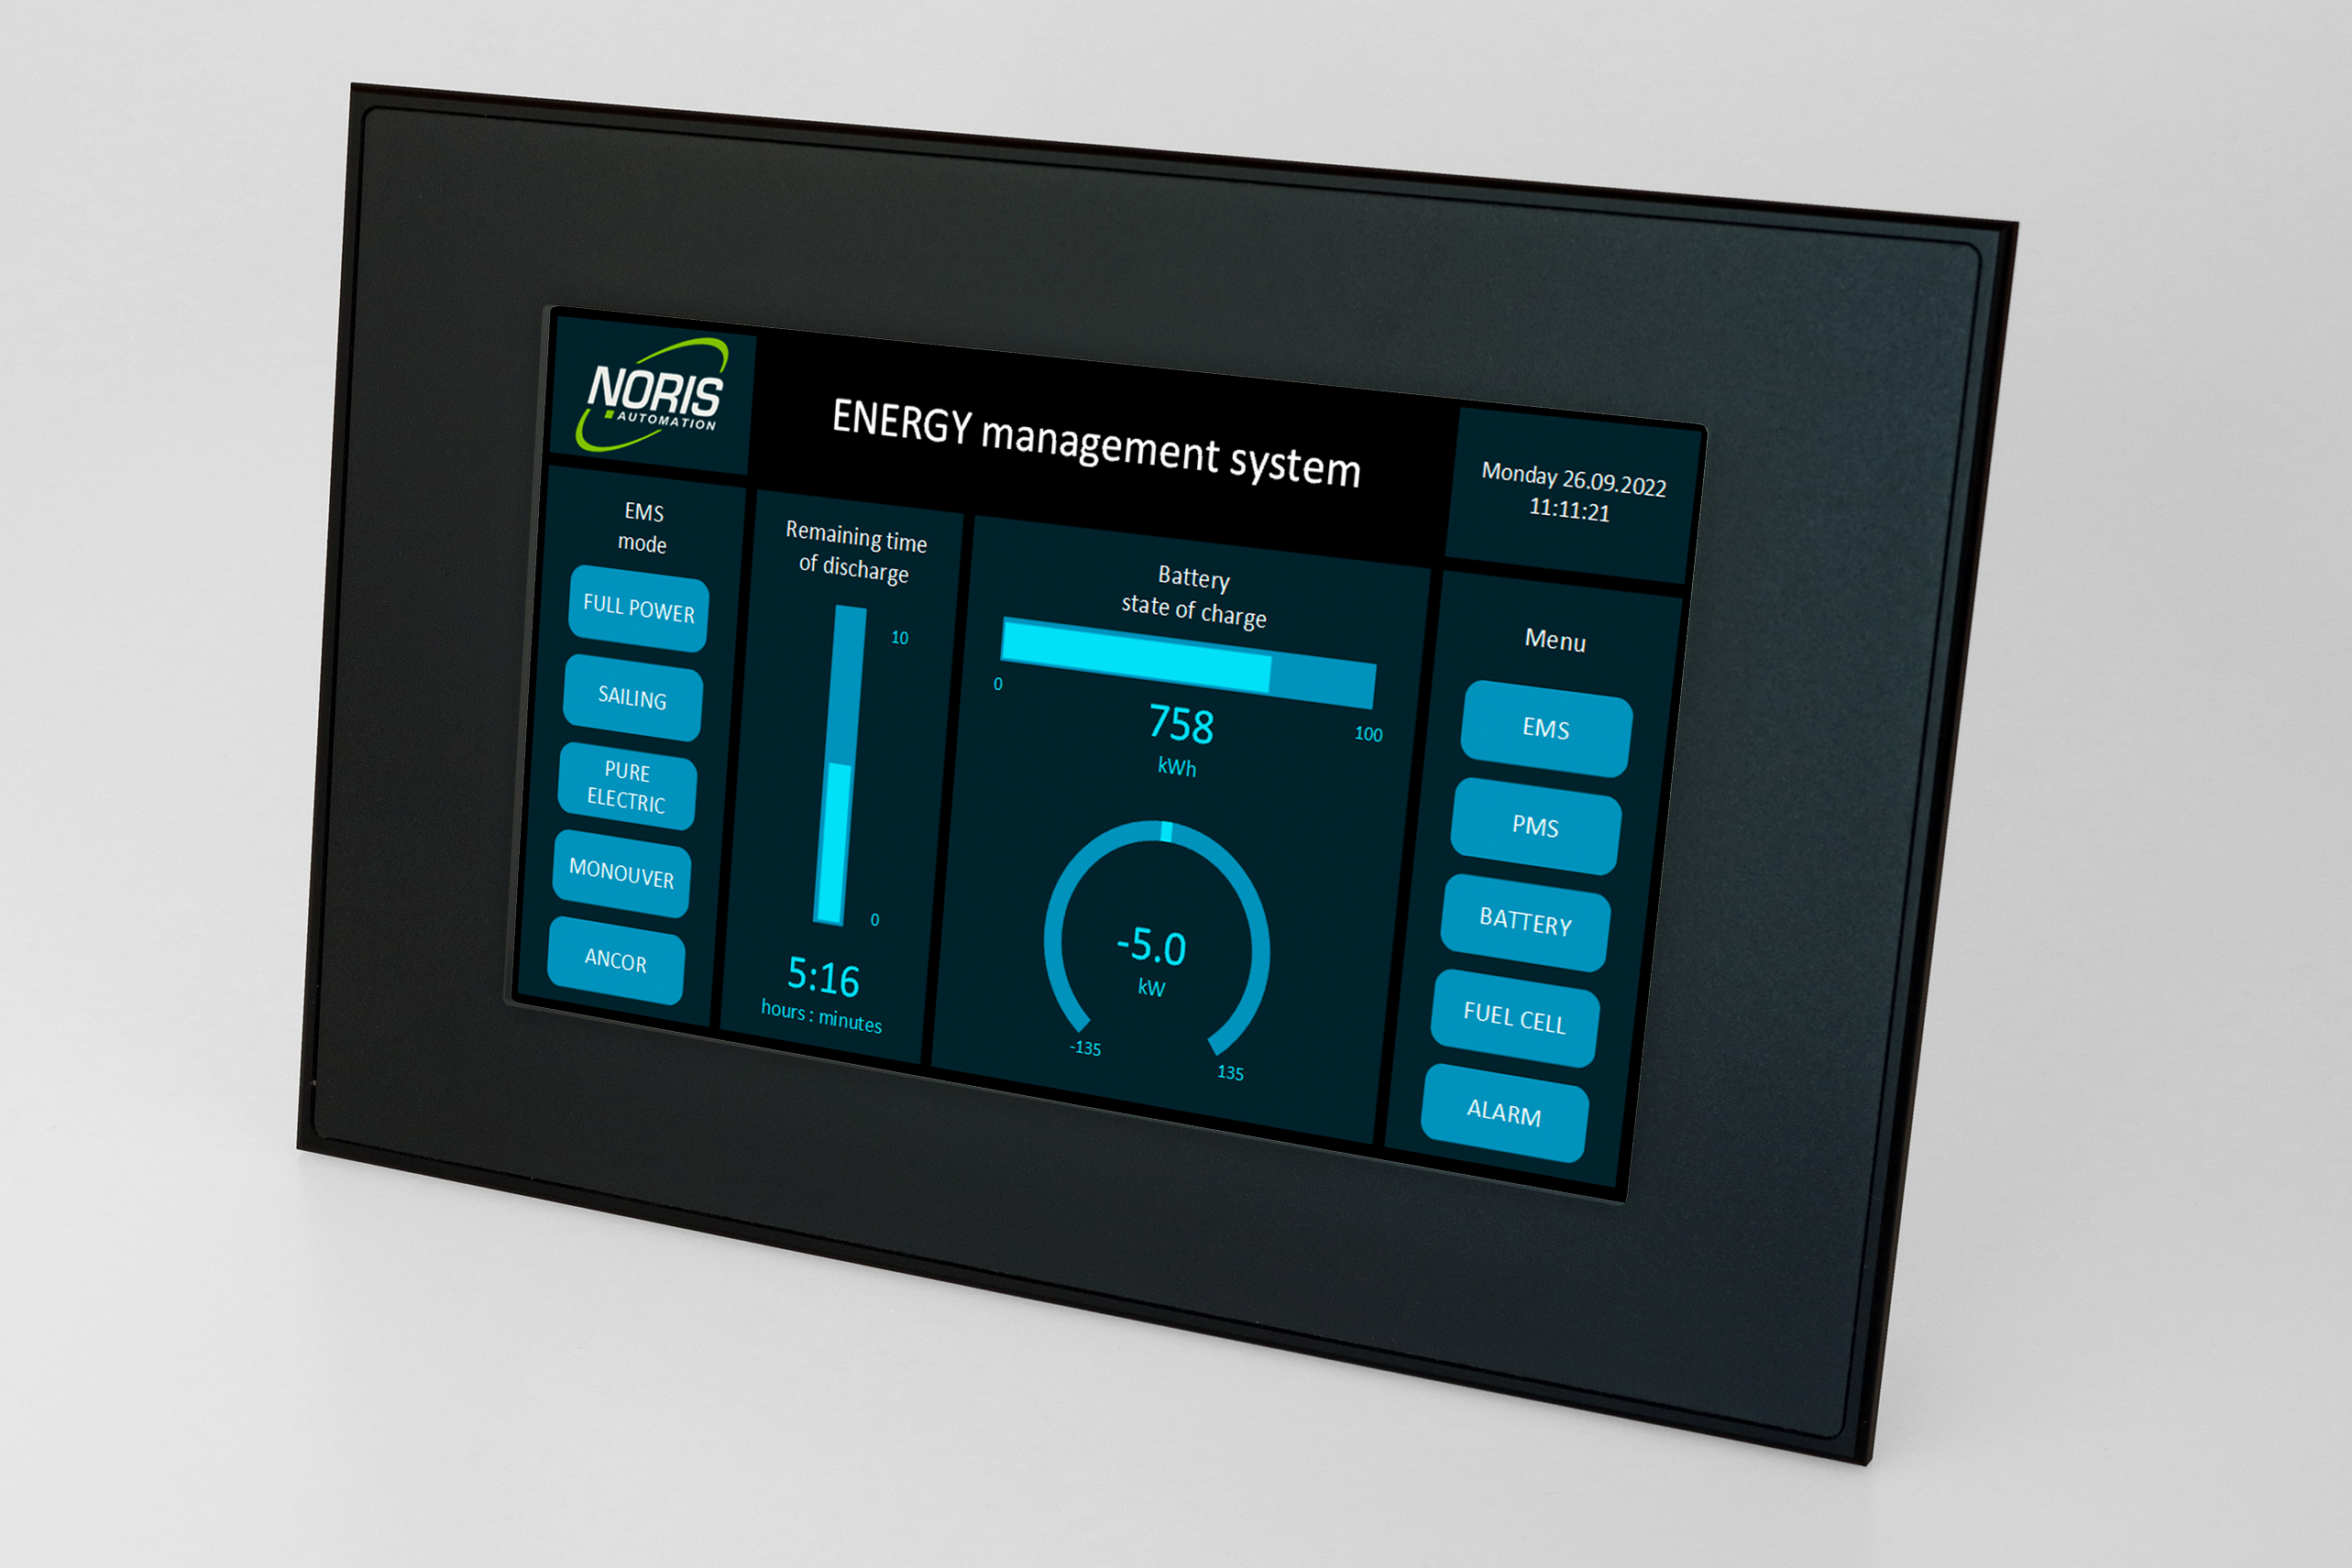 The image shows a small touchscreen display with energy management software for ships